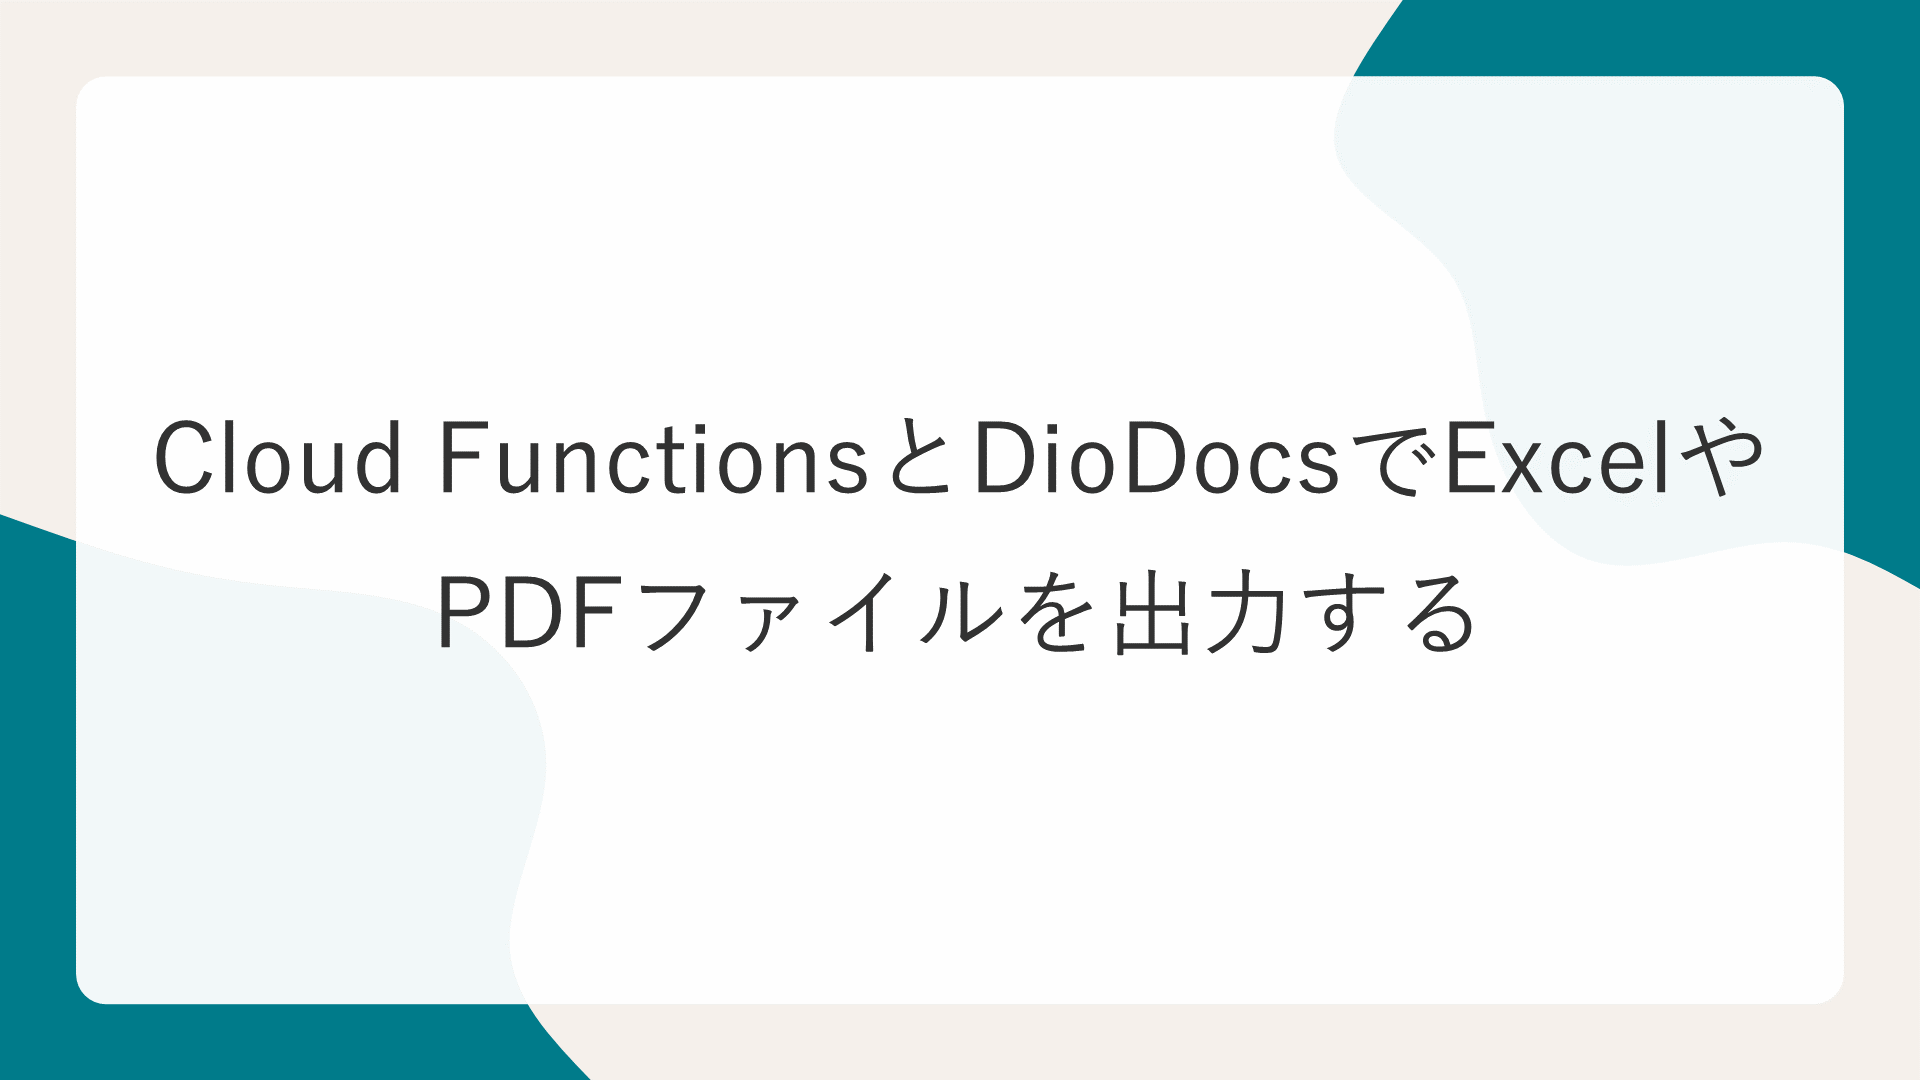 Cloud FunctionsとDioDocsでExcelやPDFファイルを出力する